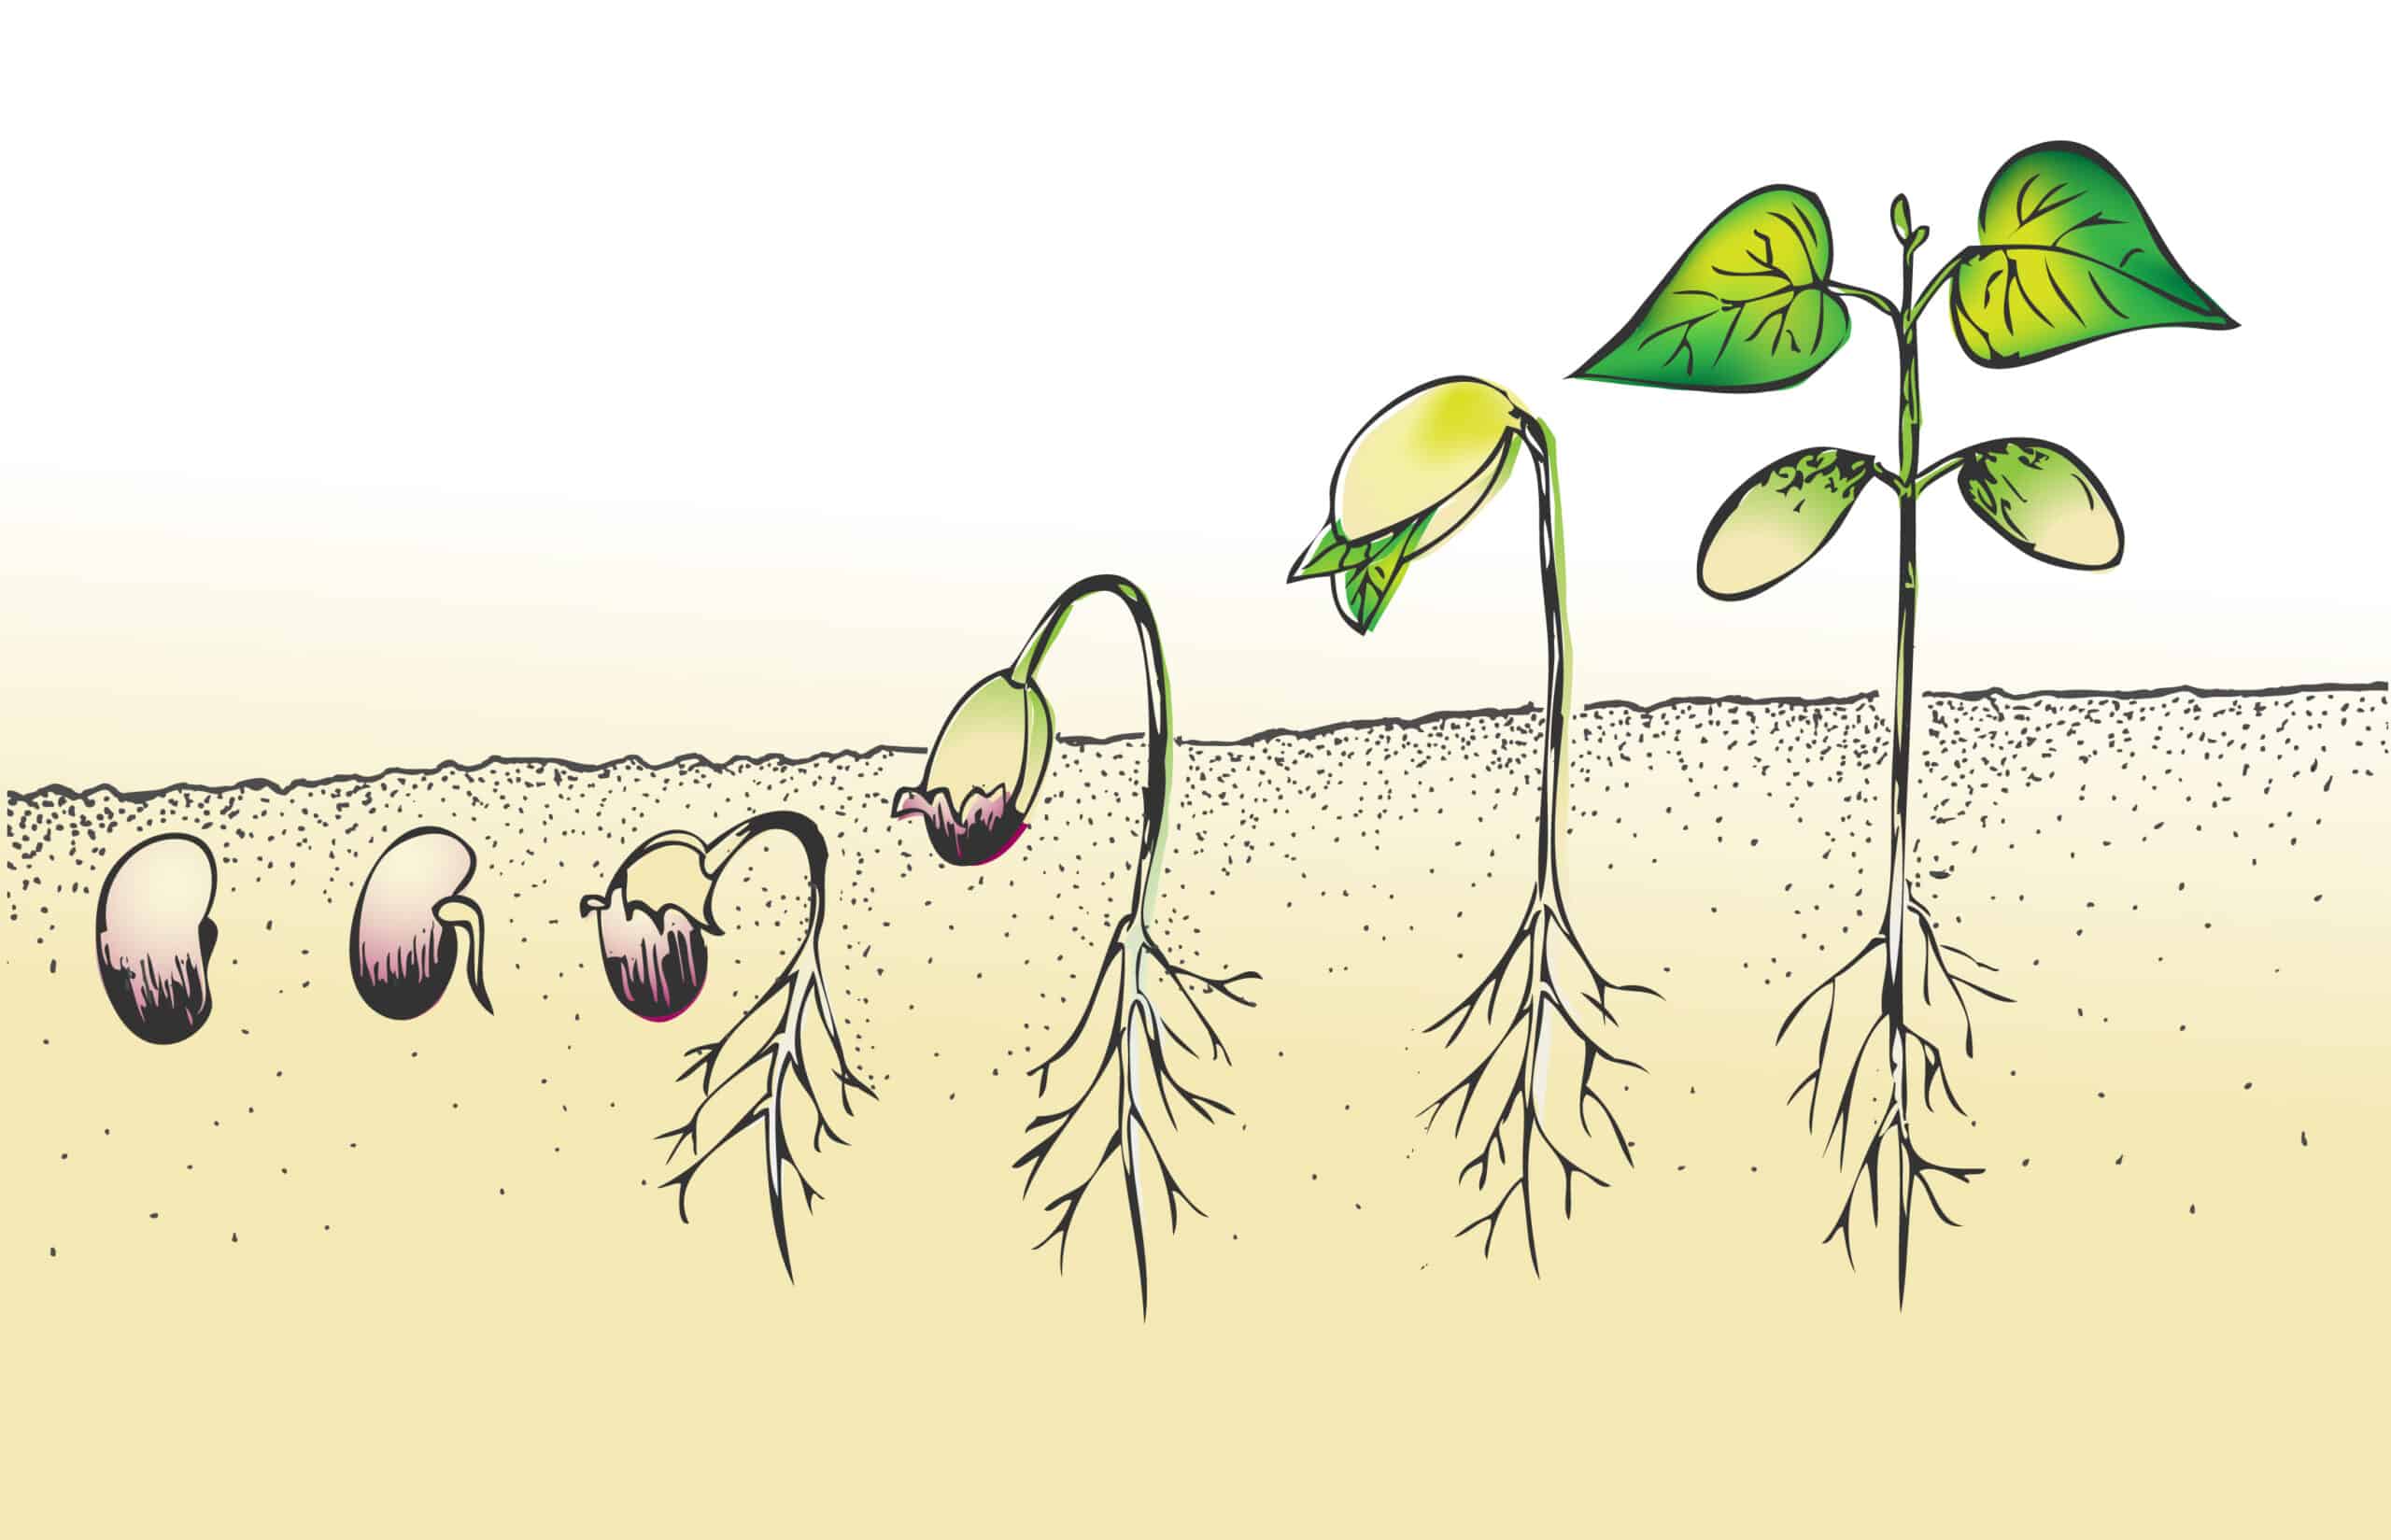 Stages of plant growth